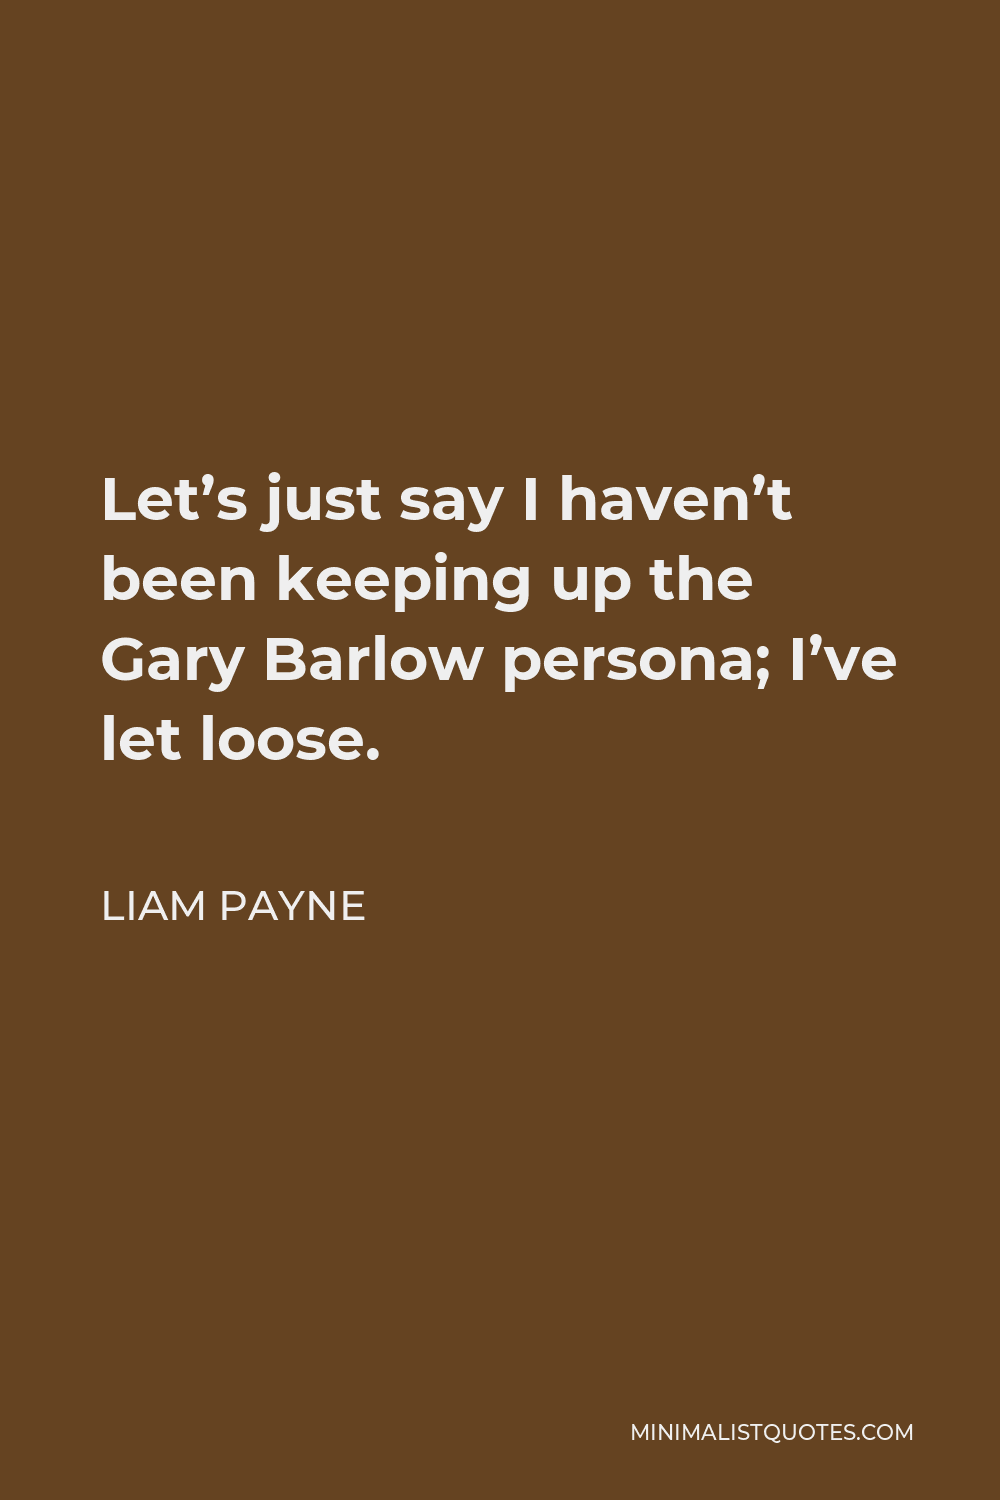 Liam Payne Quote - Let’s just say I haven’t been keeping up the Gary Barlow persona; I’ve let loose.